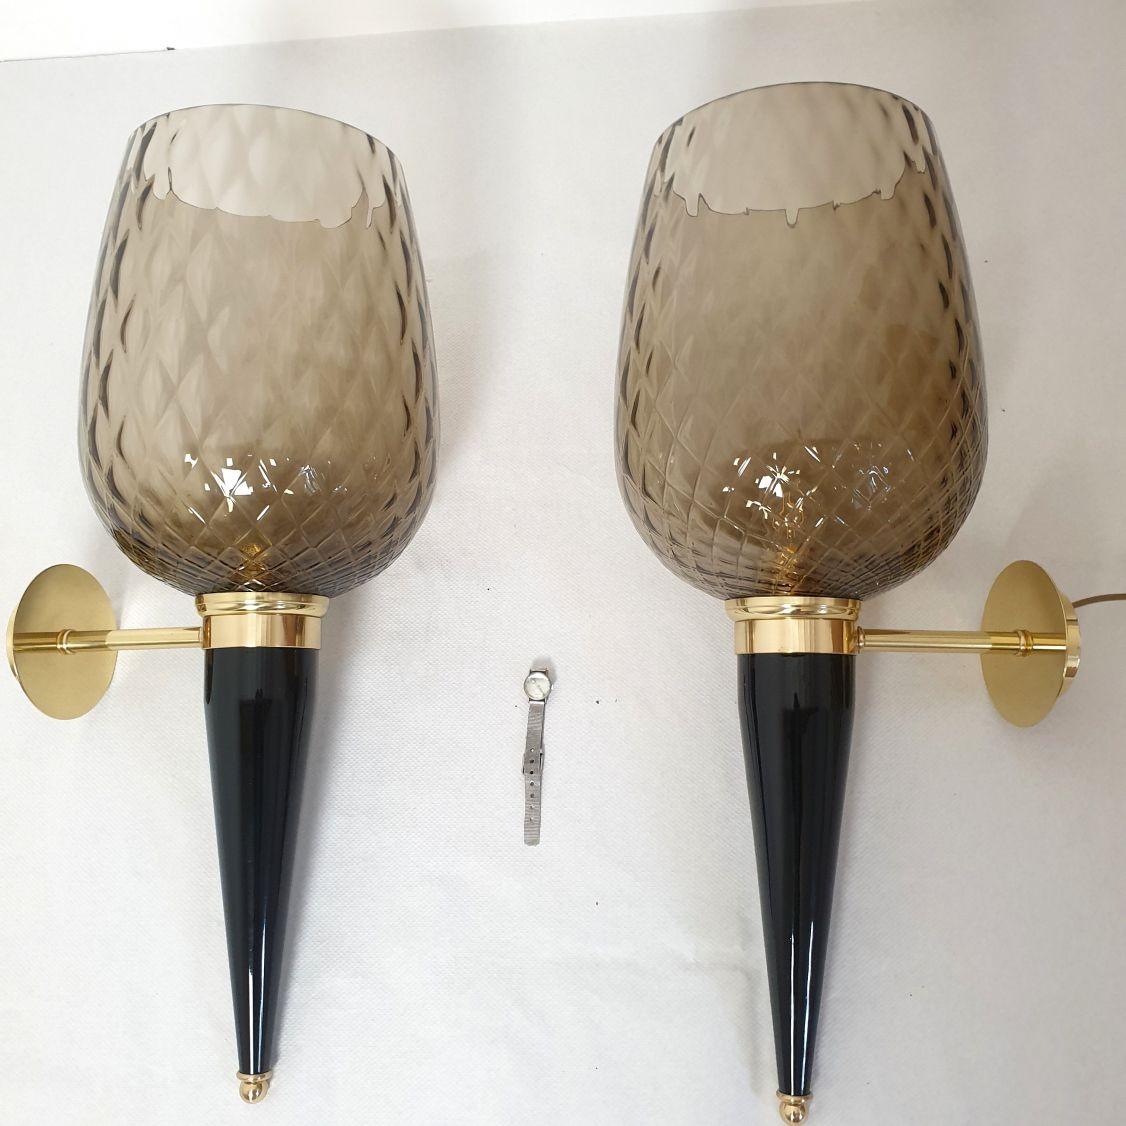 Pair of extra large Murano glass sconces, attributed to Mila Schon, Italy 1970s.
Set of six or three pairs available. Sold and priced by pair.
To inquire about the set of six, select 3 items in the menu.
The Mid-Century Modern sconces are made of a